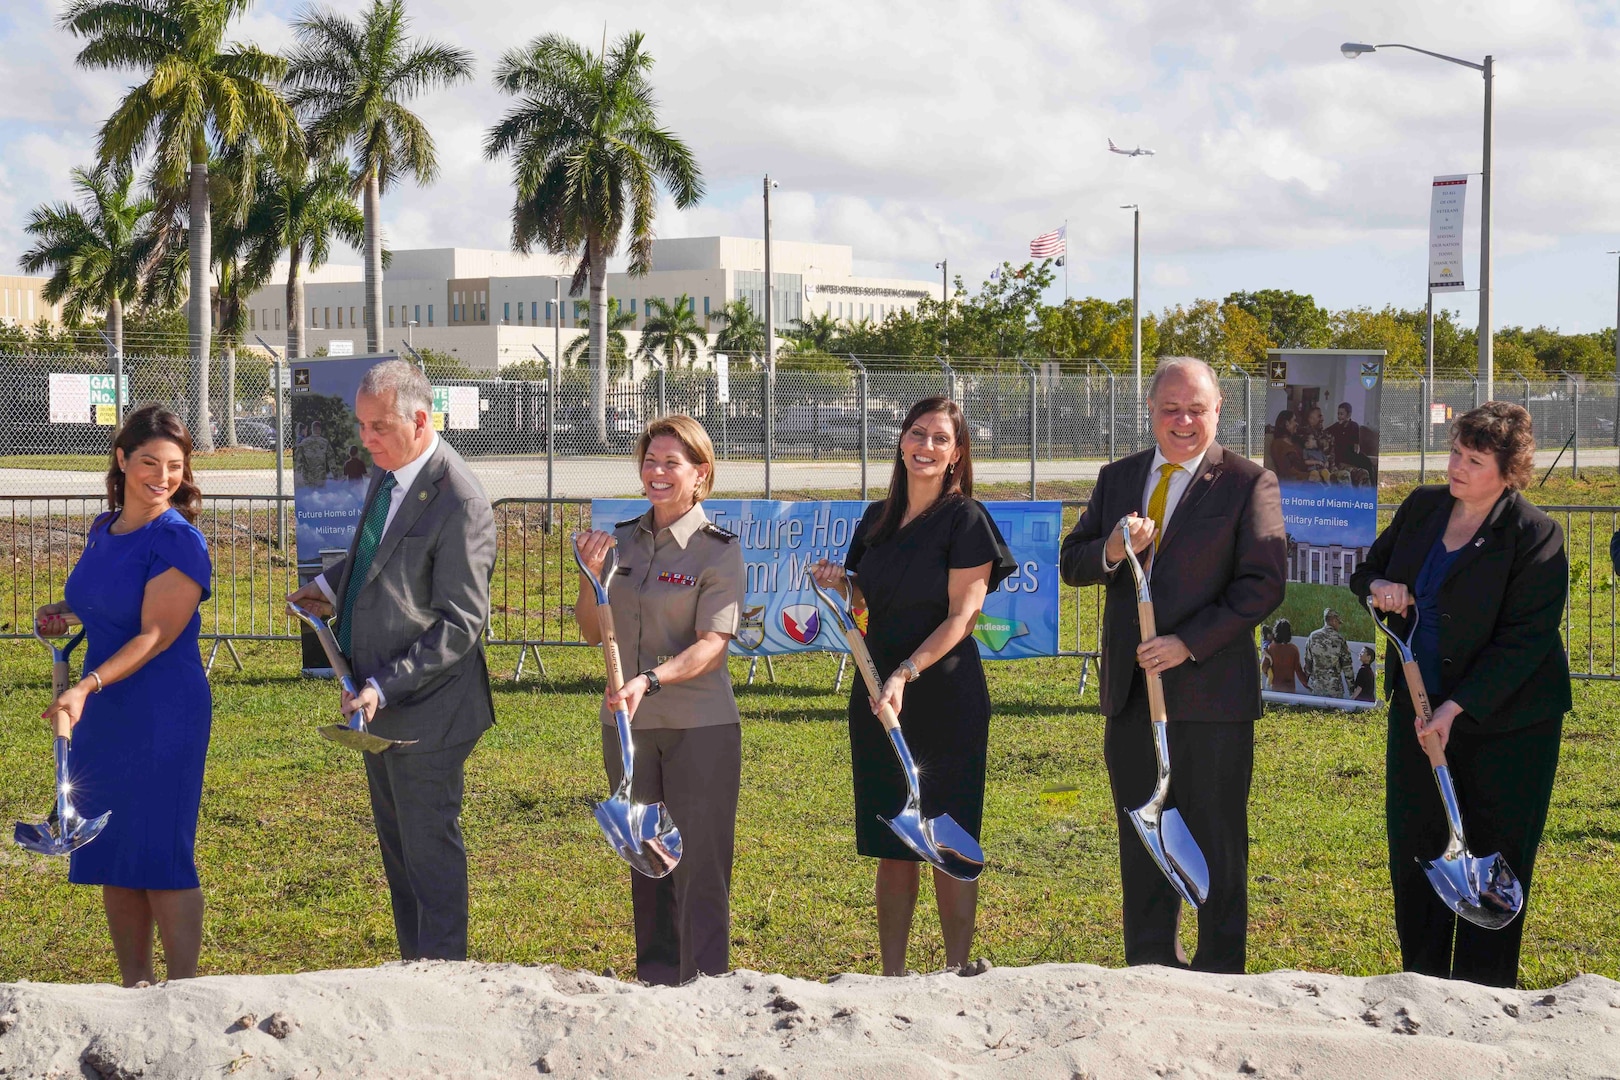 Gen. Laura Richardson, commander of U.S. Southern Command (SOUTHCOM), center, and distinguished guests break ground during a ceremony for the future site of the new military housing complex supporting SOUTHCOM's service members and their families.